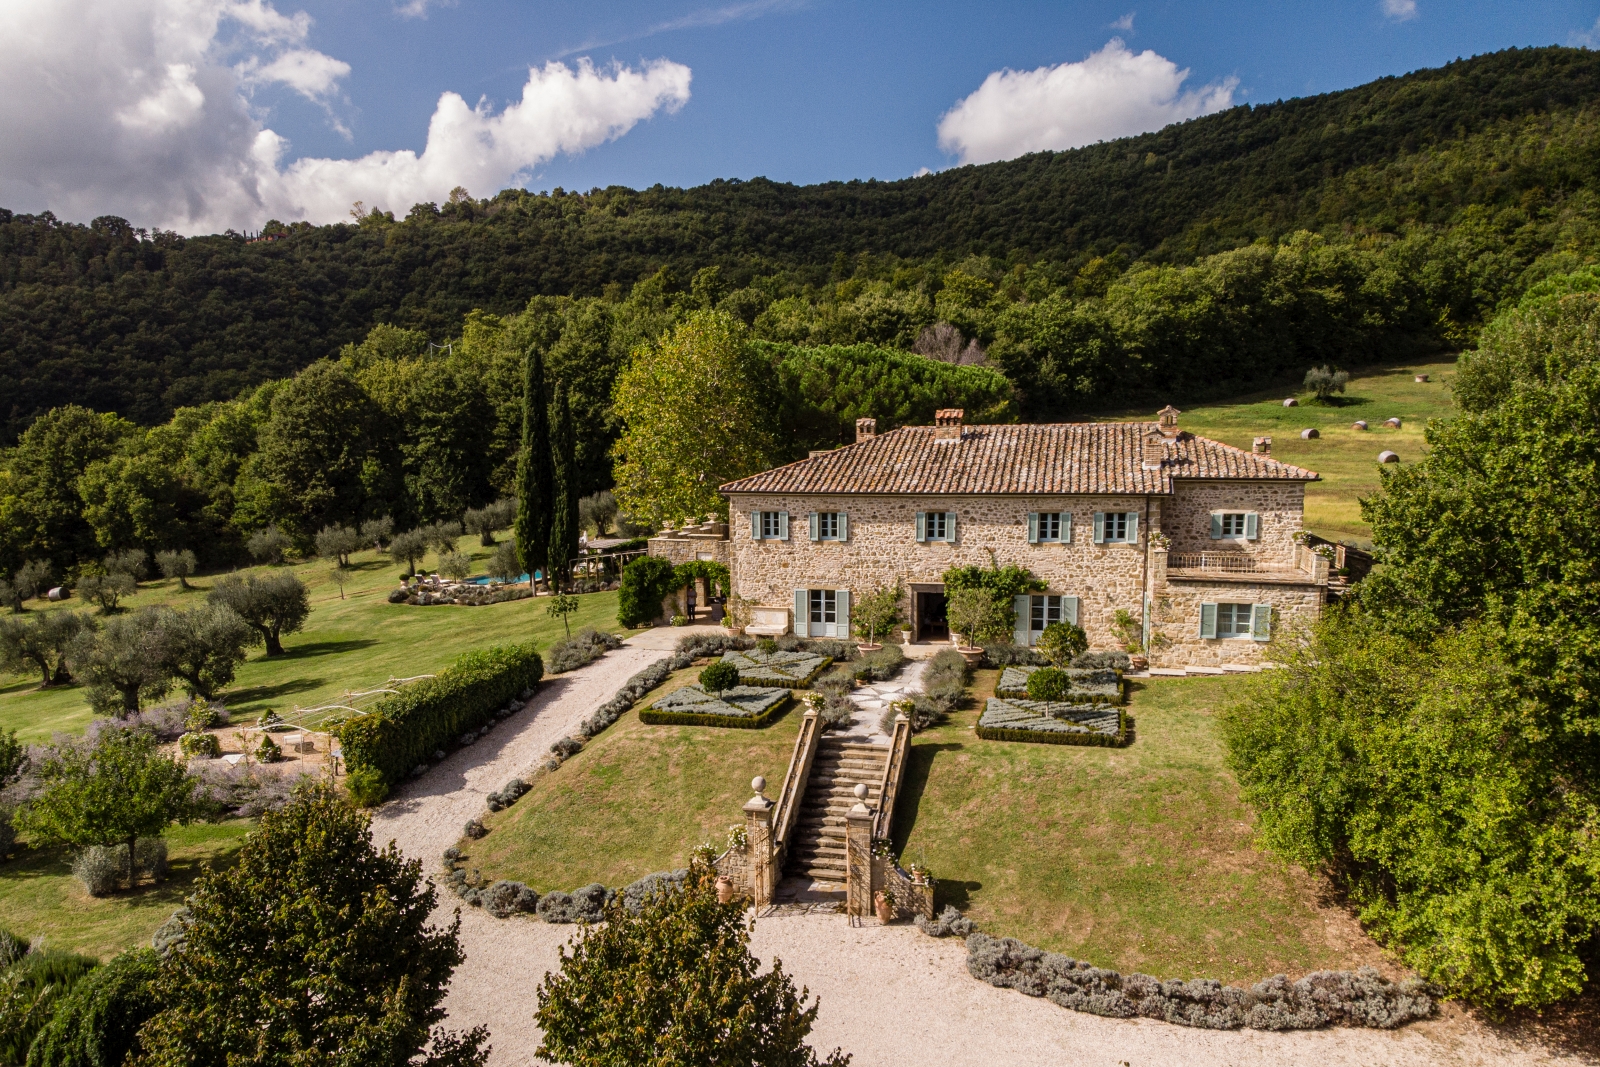 Aerial view of villa with gardens, trees, forest, flowers, pool, patio and driveway at Tenuta Cantata in Tuscany, Italy